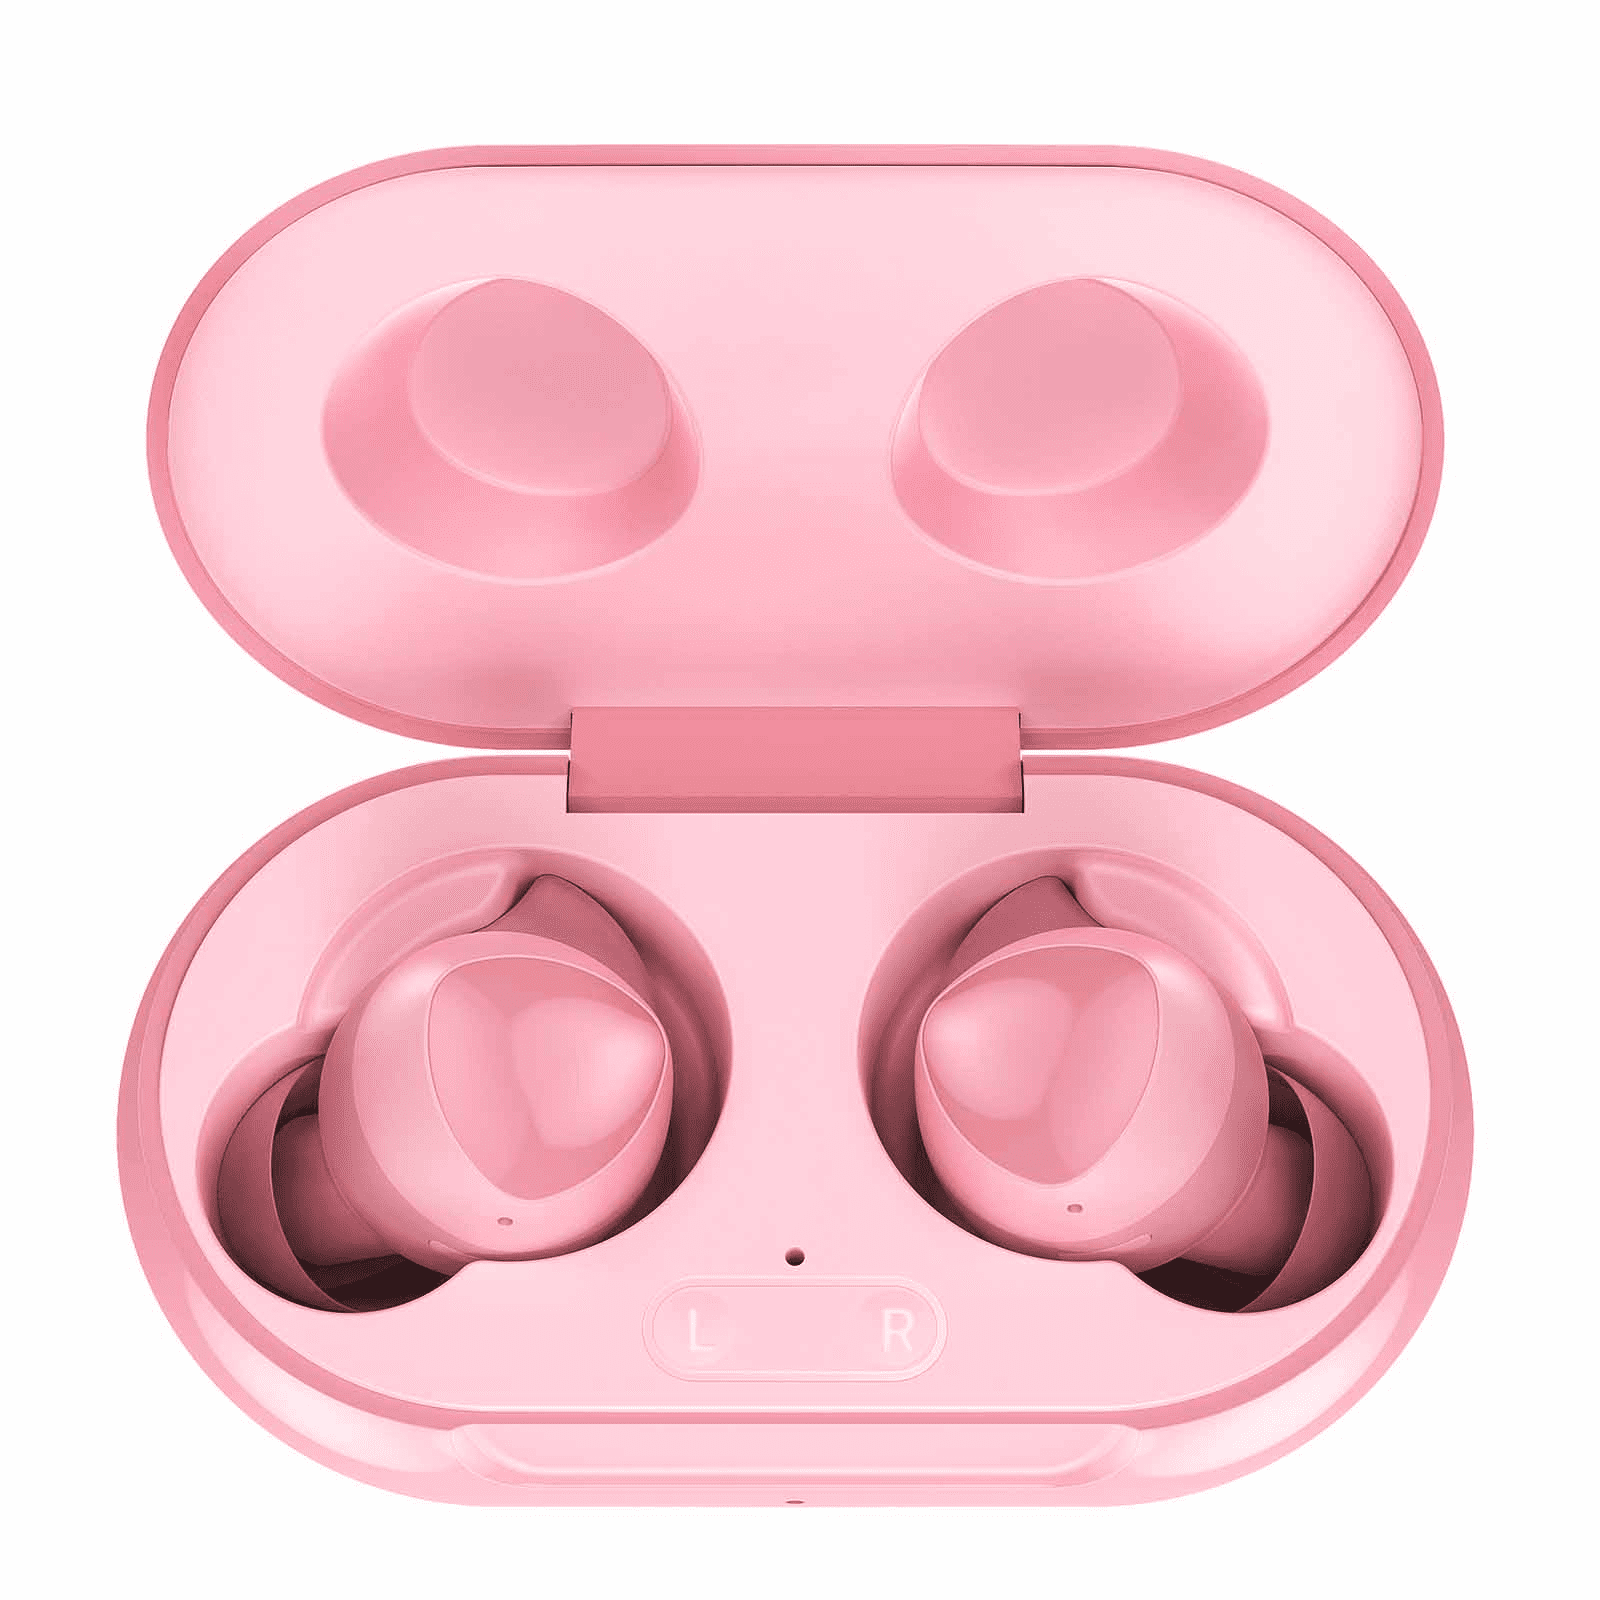 stroom omroeper Ontembare UrbanX Street Buds Plus True Bluetooth Wireless Earbuds For Huawei Mate 9  Porsche Design With Active Noise Cancelling (Charging Case Included) Pink -  Walmart.com